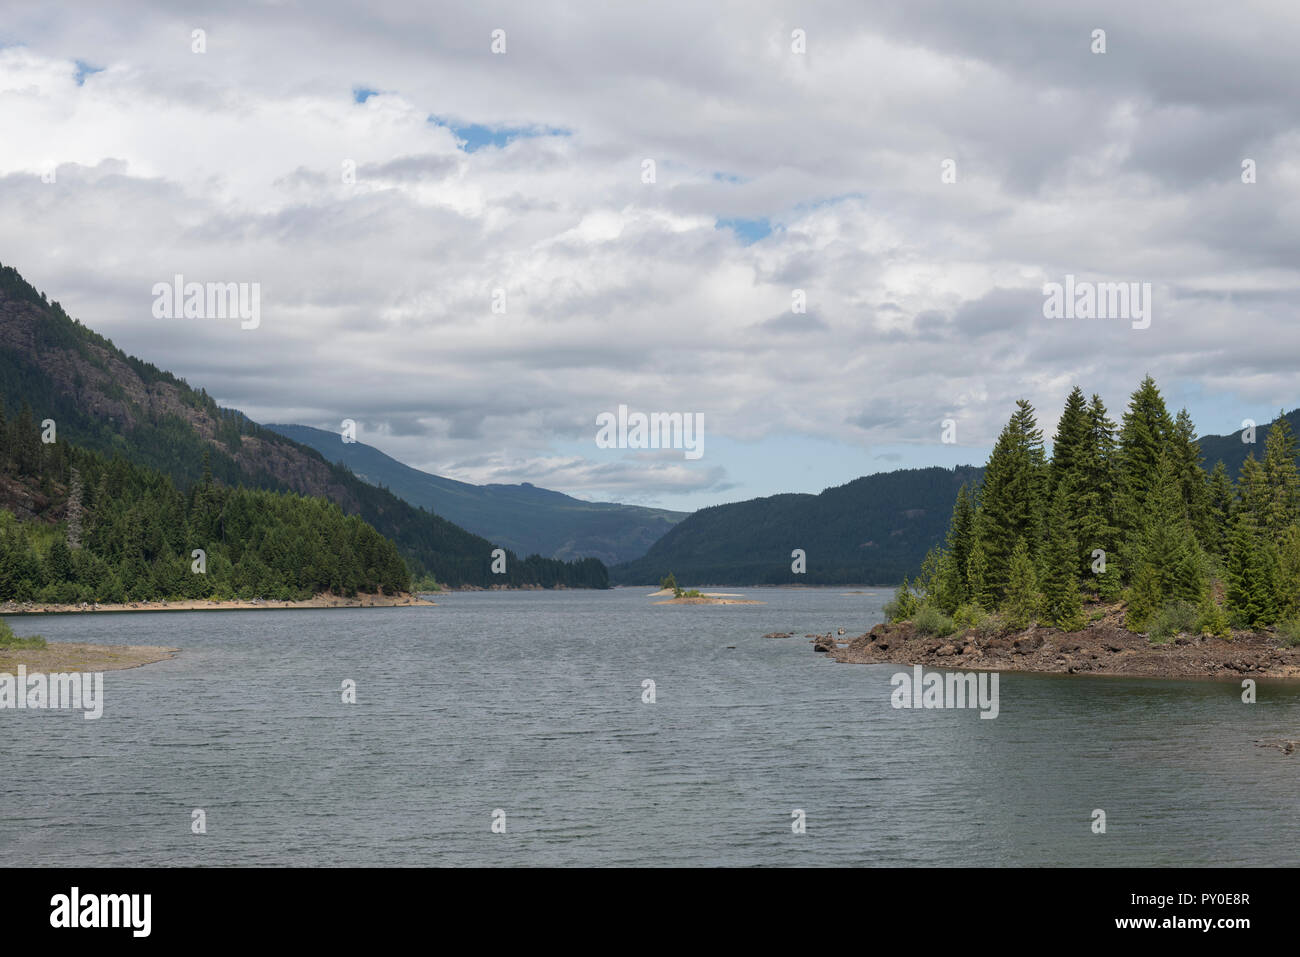 Upper Campbell Lake on Vancouver Island, British Columbia, Canada. Stock Photo